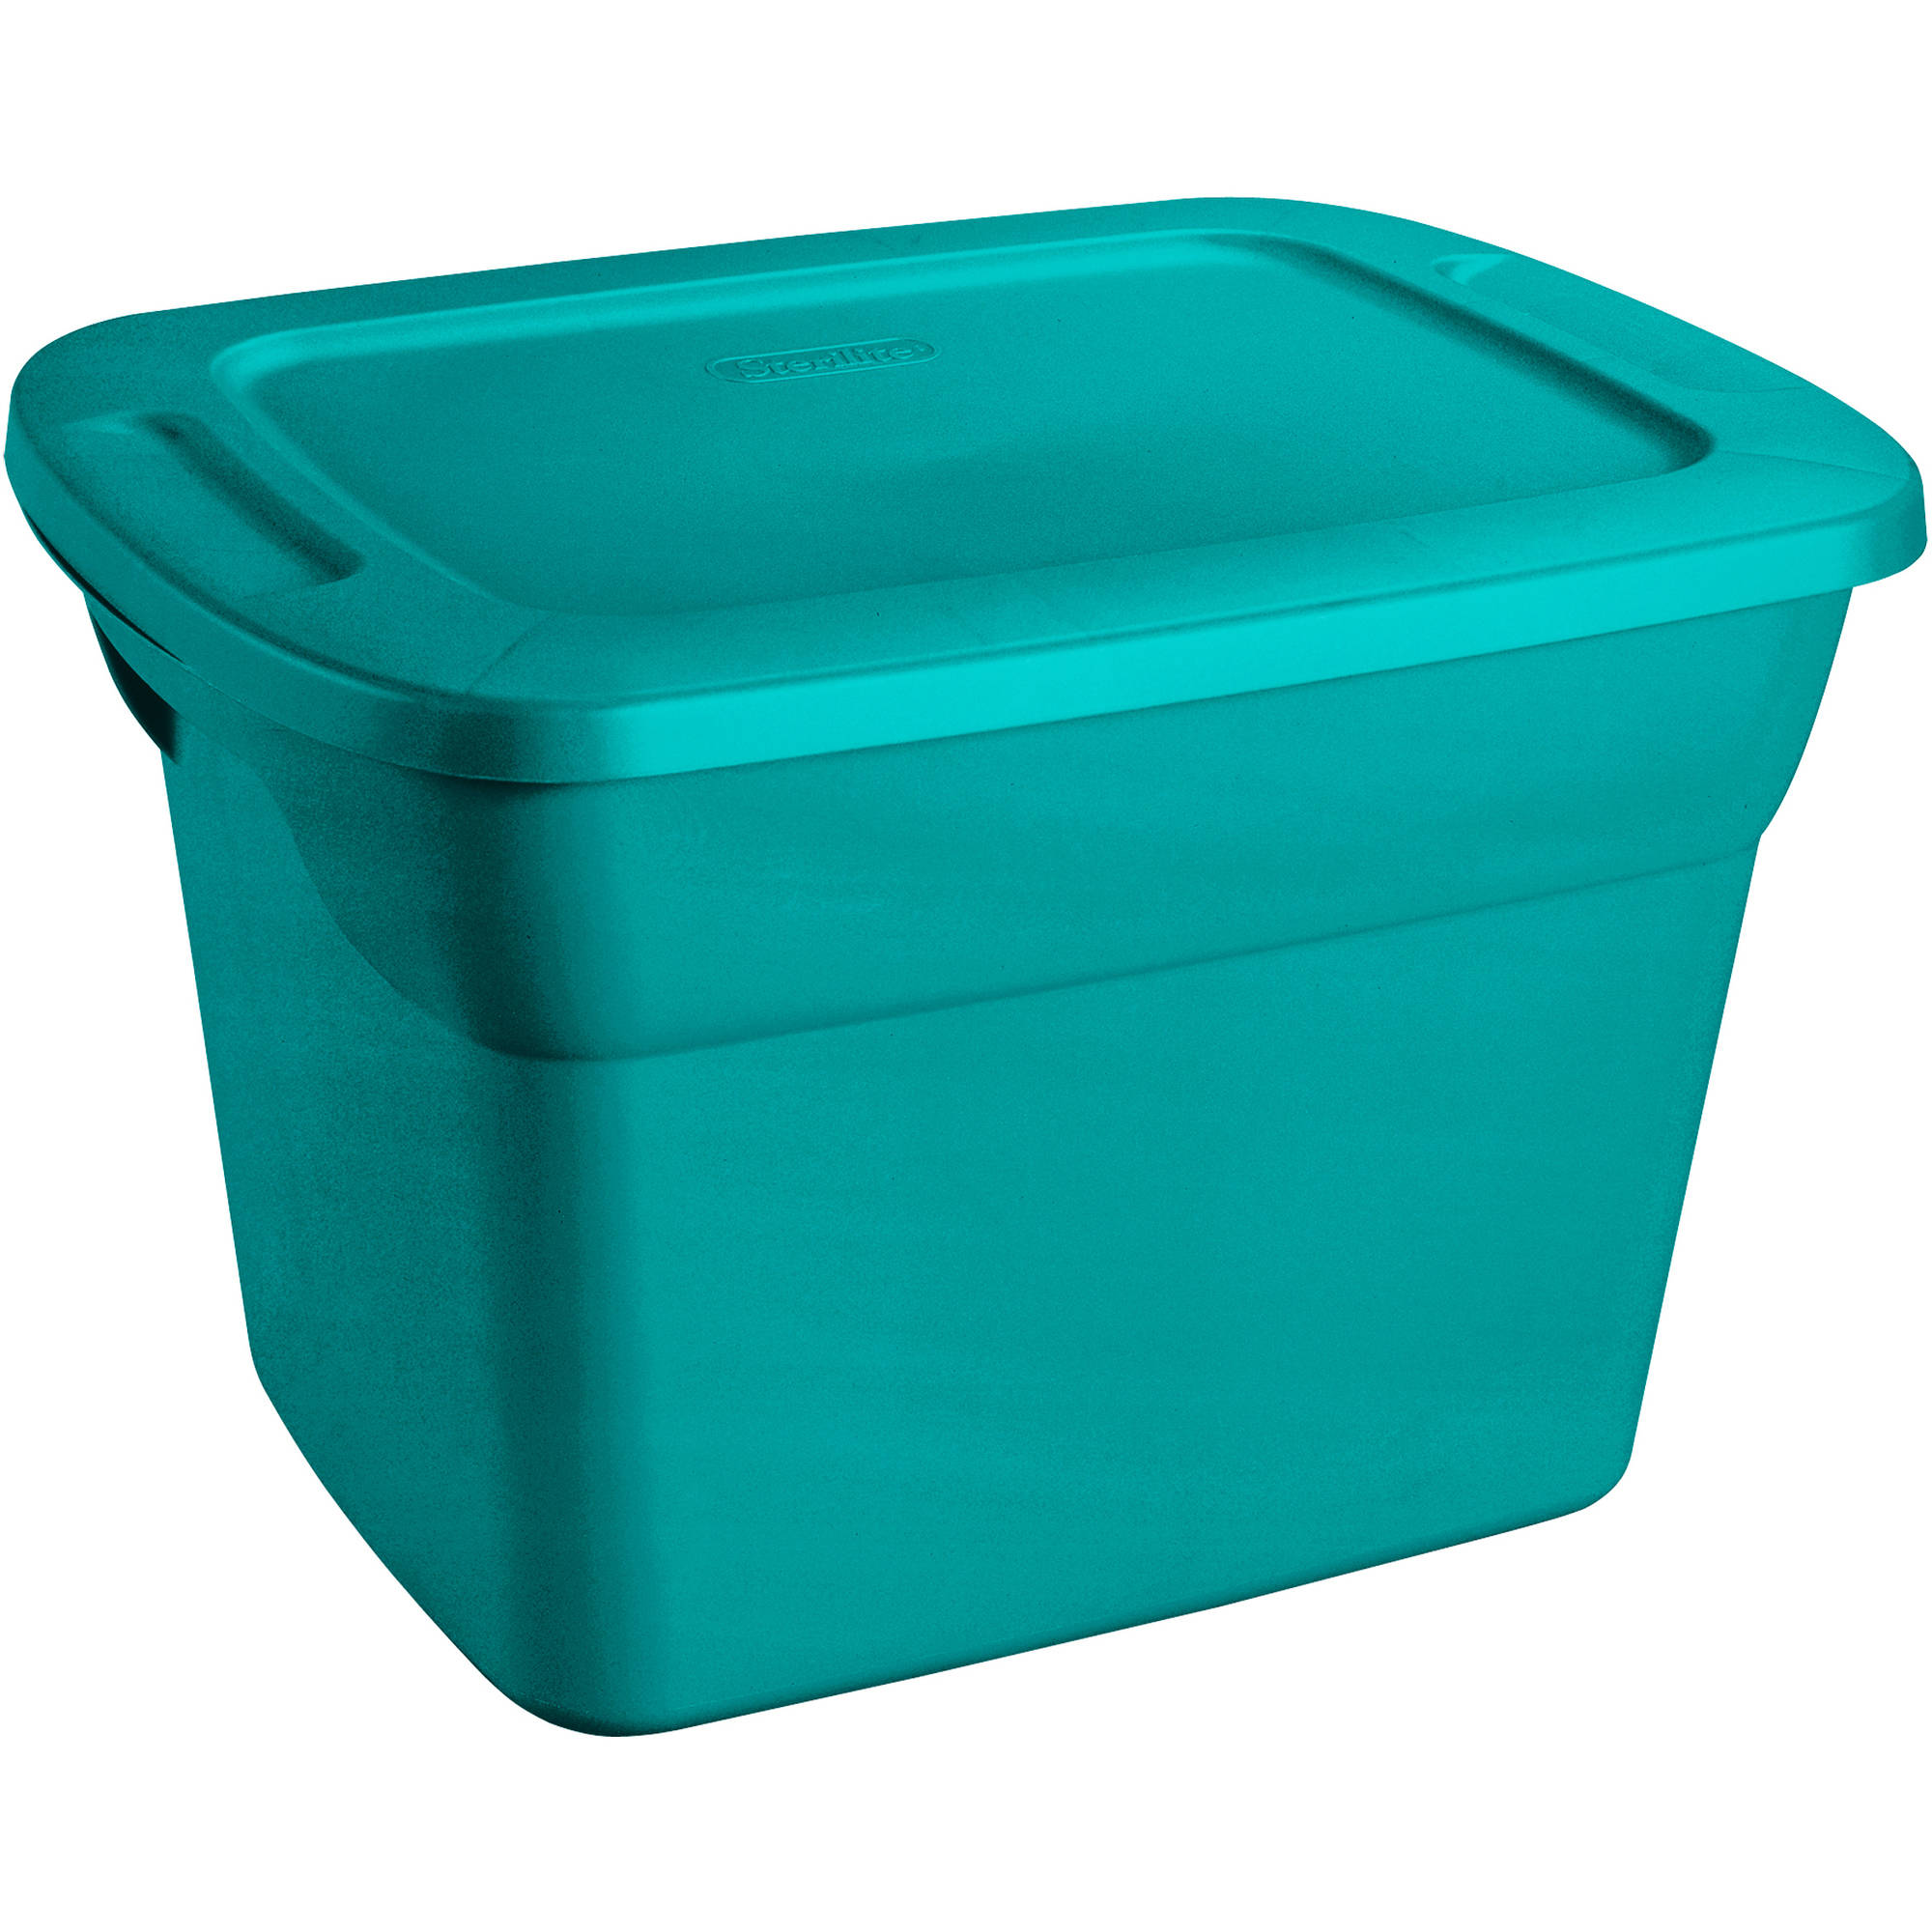 Sterilite 18 Gallon Tote Box- Teal Sachet (Available in Case of 8 or Single Unit) - image 1 of 1